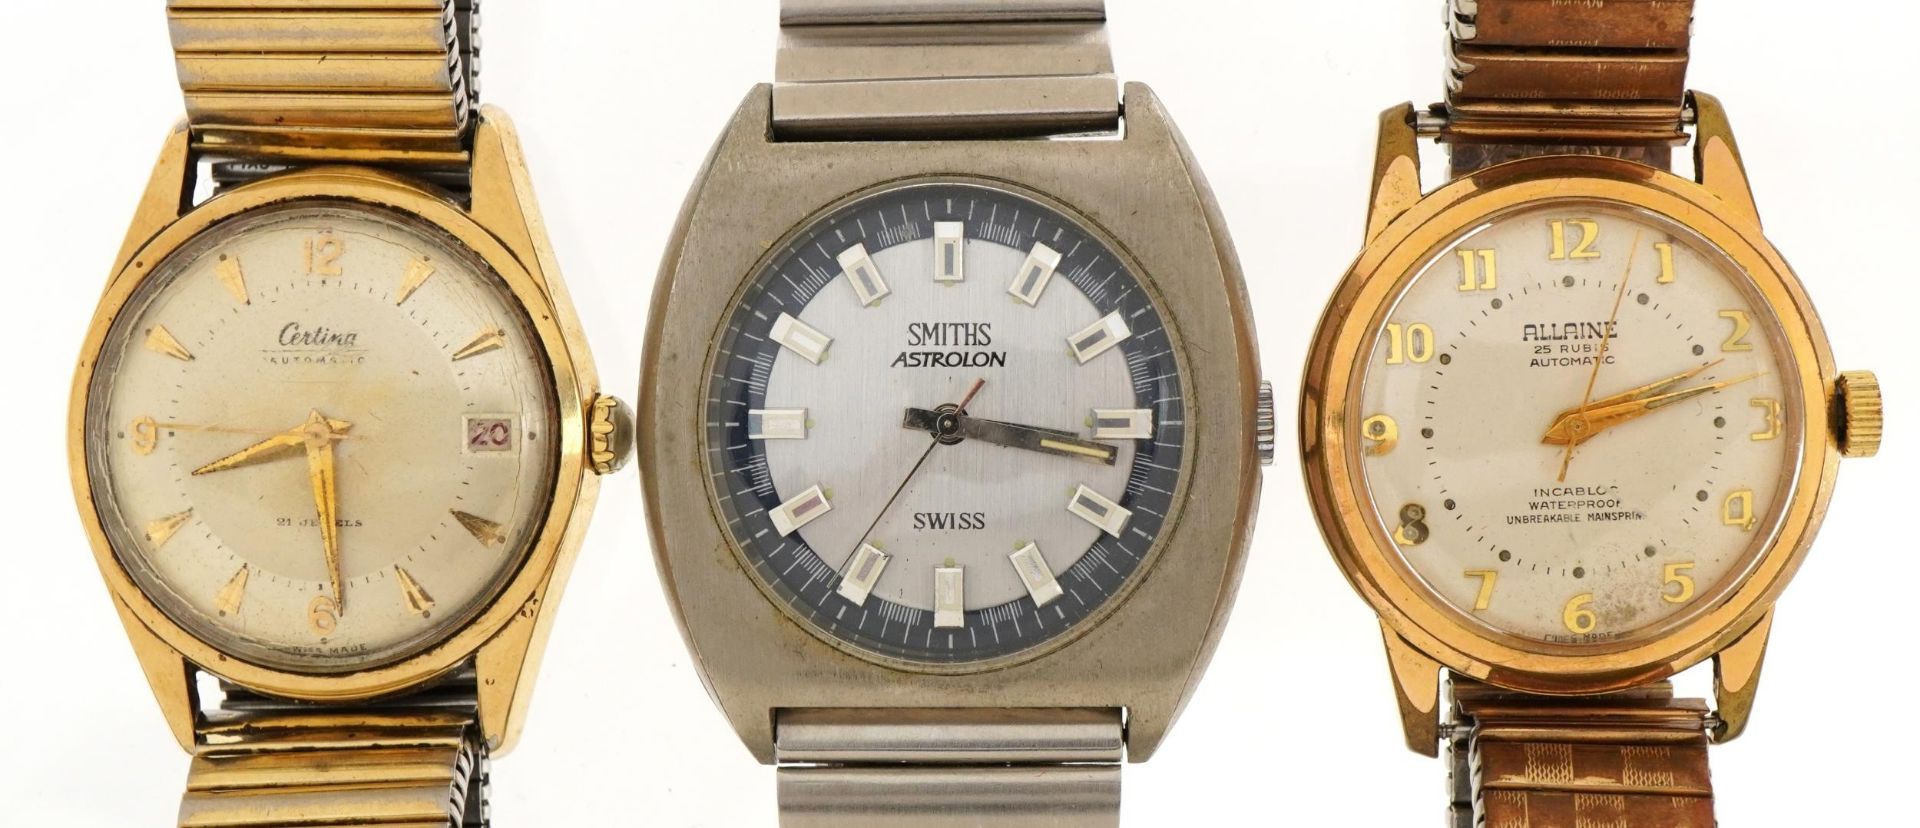 Three vintage gentlemen's wristwatches comprising Centina automatic with date aperture, Allaine